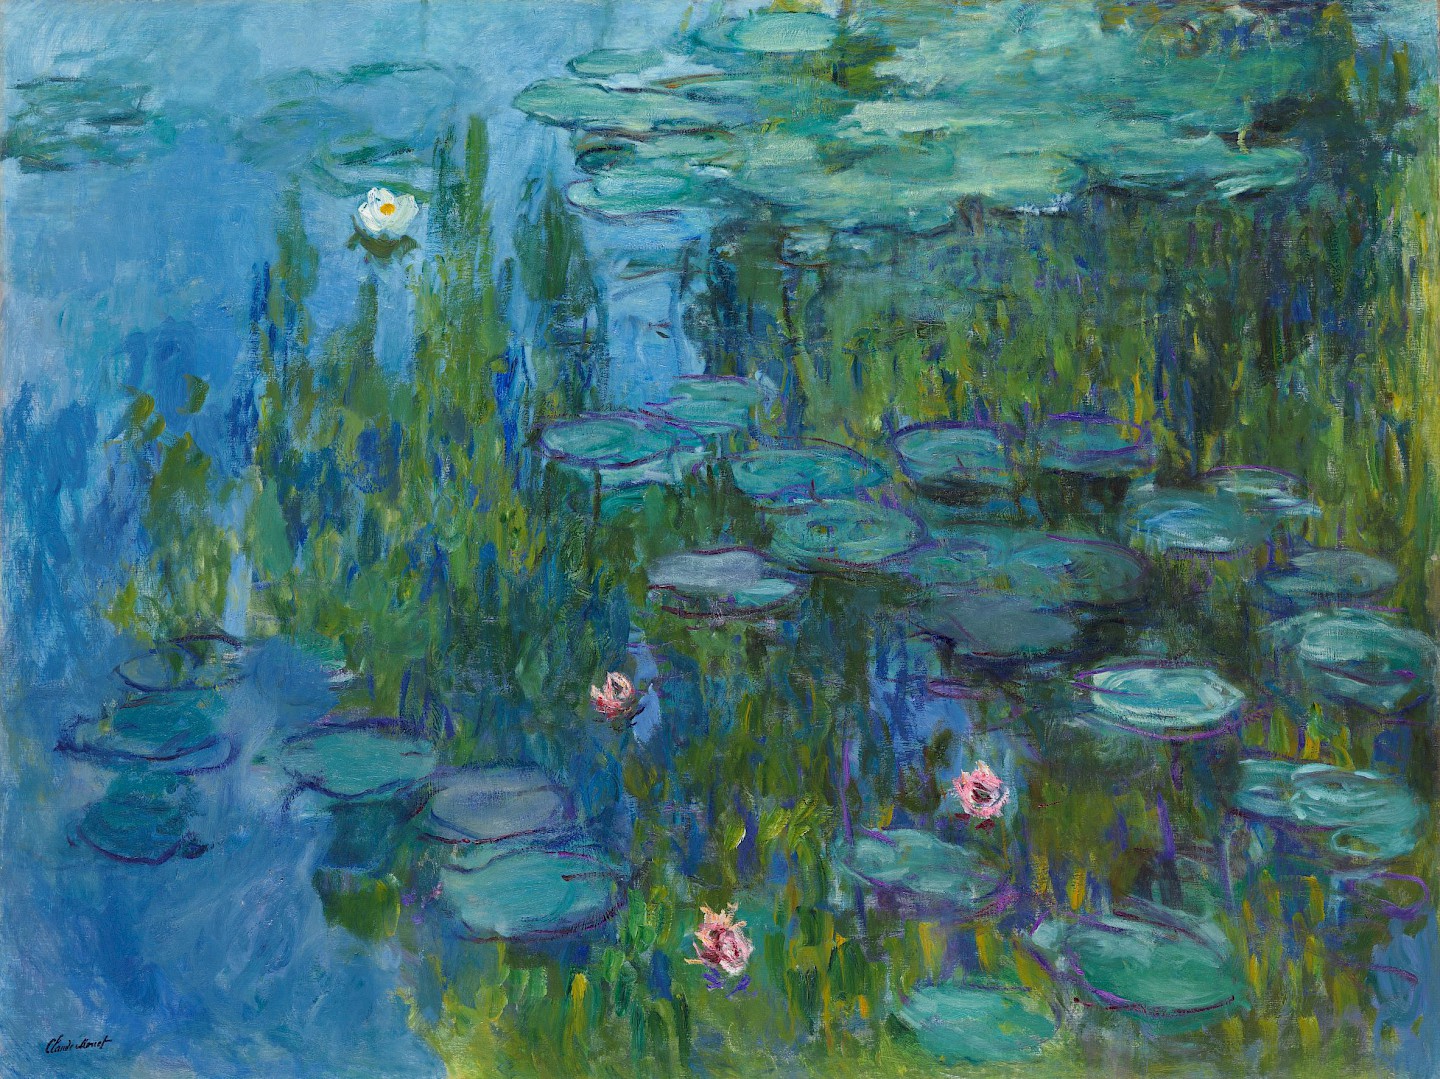 Impressionistic painting of water lilies in a pond